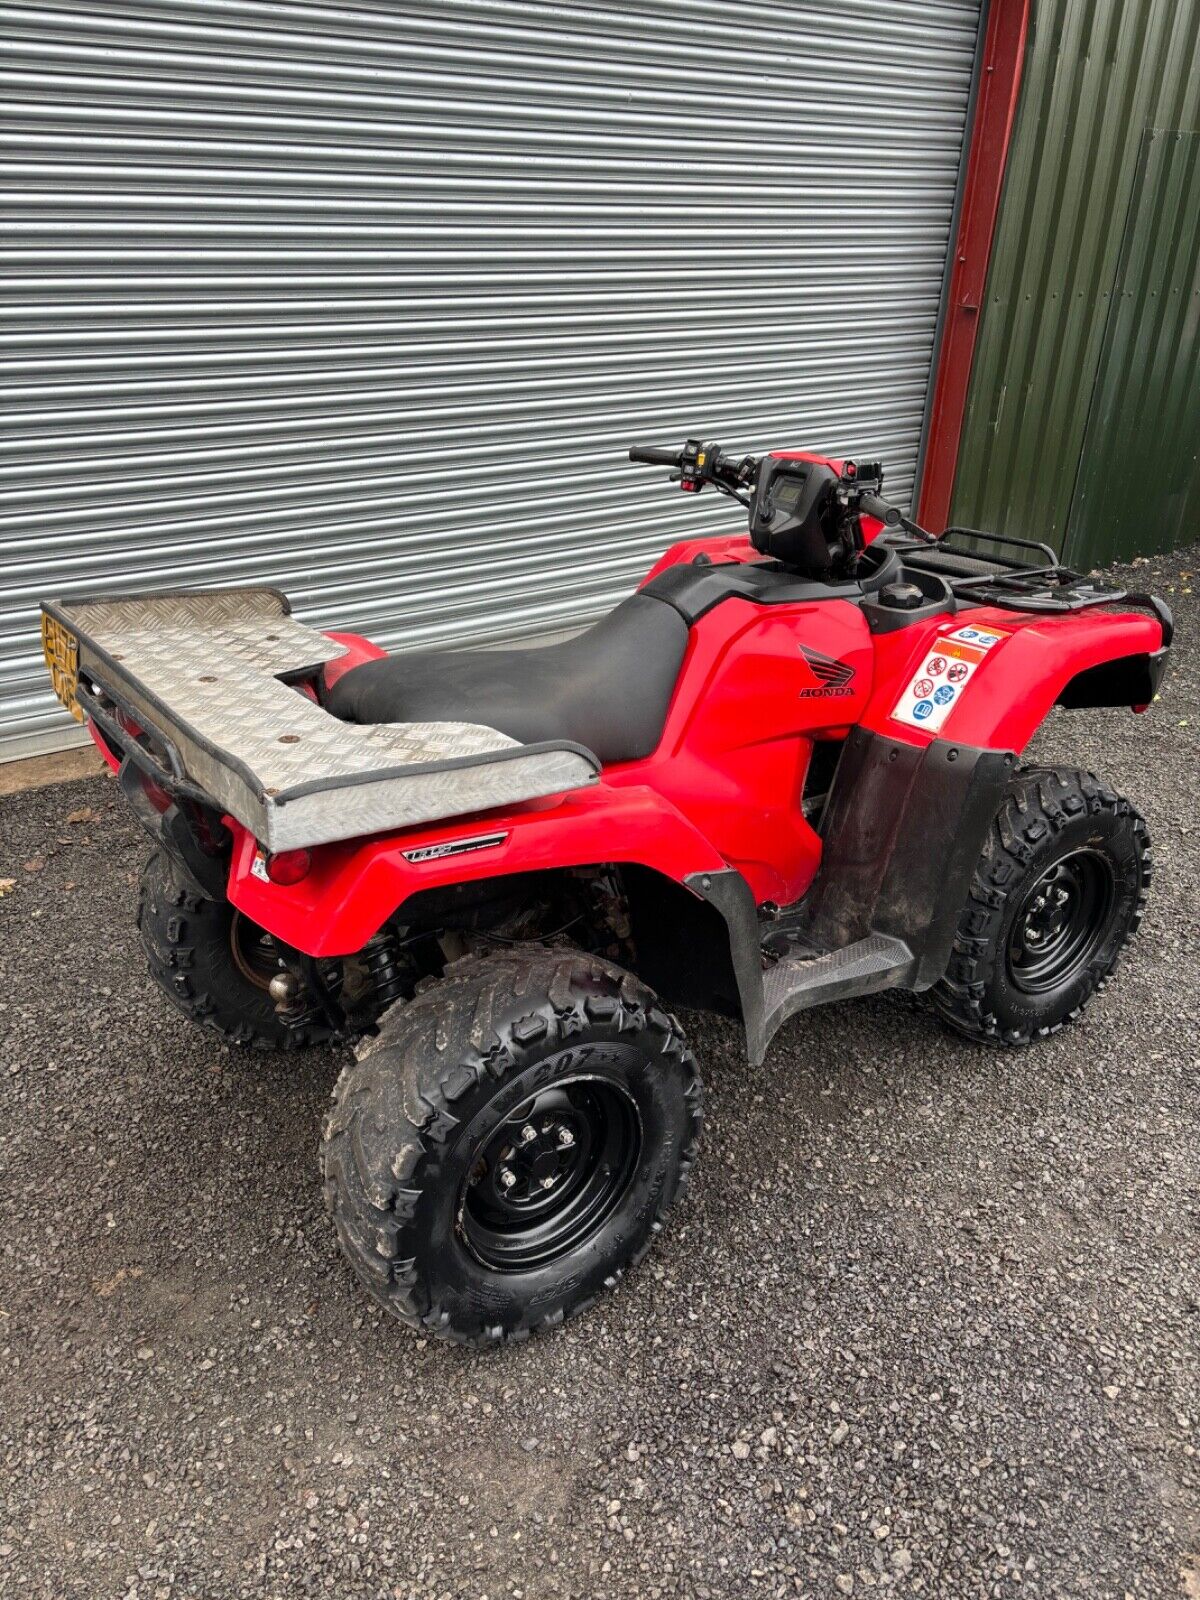 Bid on (ONLY 710 HOURS)* TRX500 FOREMAN HONDA QUAD BIKE- Buy &amp; Sell on Auction with EAMA Group